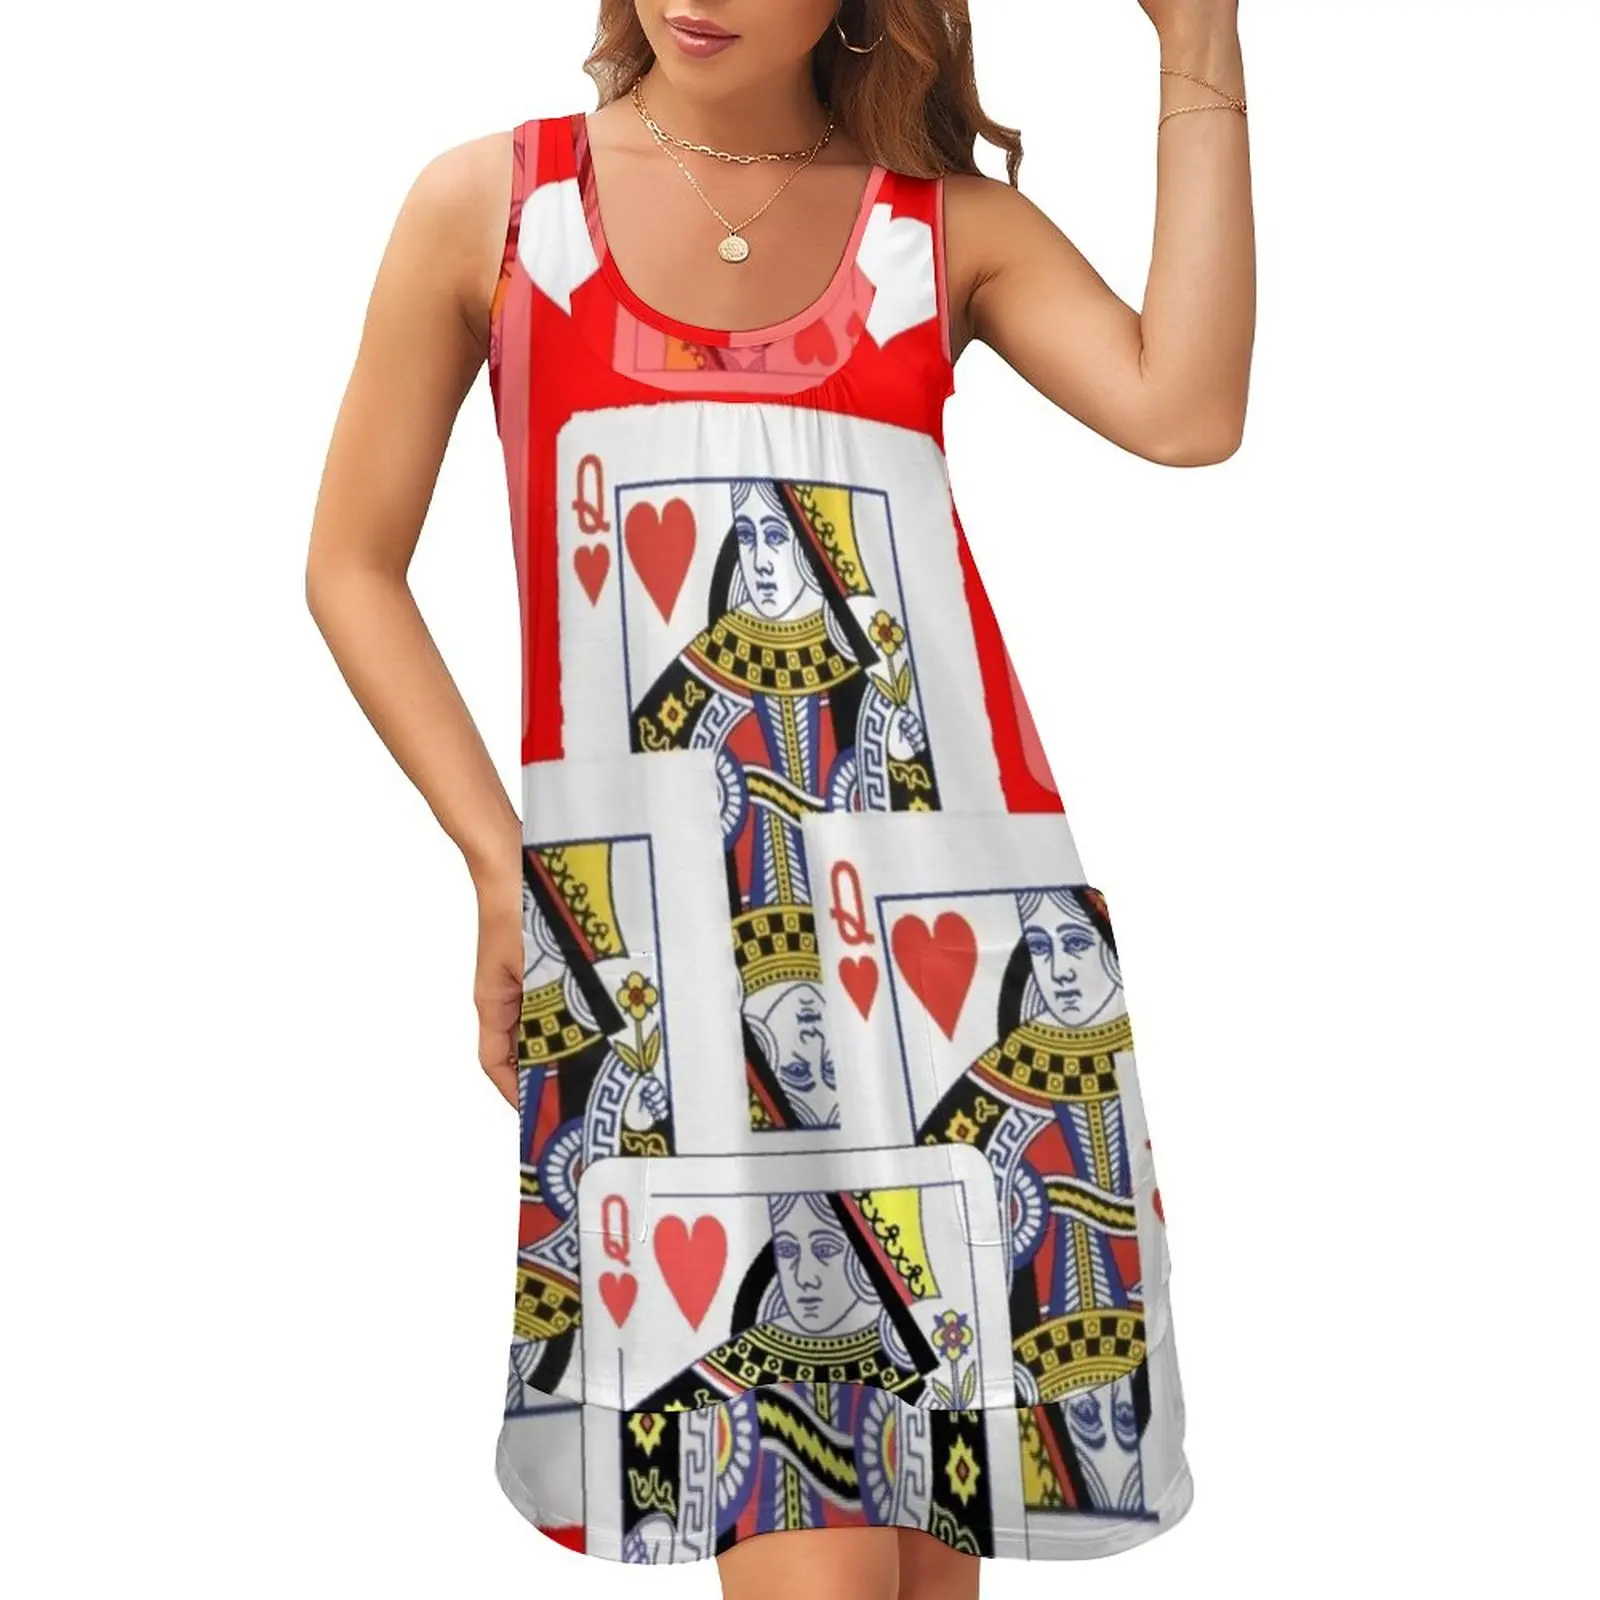 Poker Cards Dress Red Queen Heart Aesthetic Dresses Summer Print Boho Beach Casual Dress Sleeveless Clothes Large Size